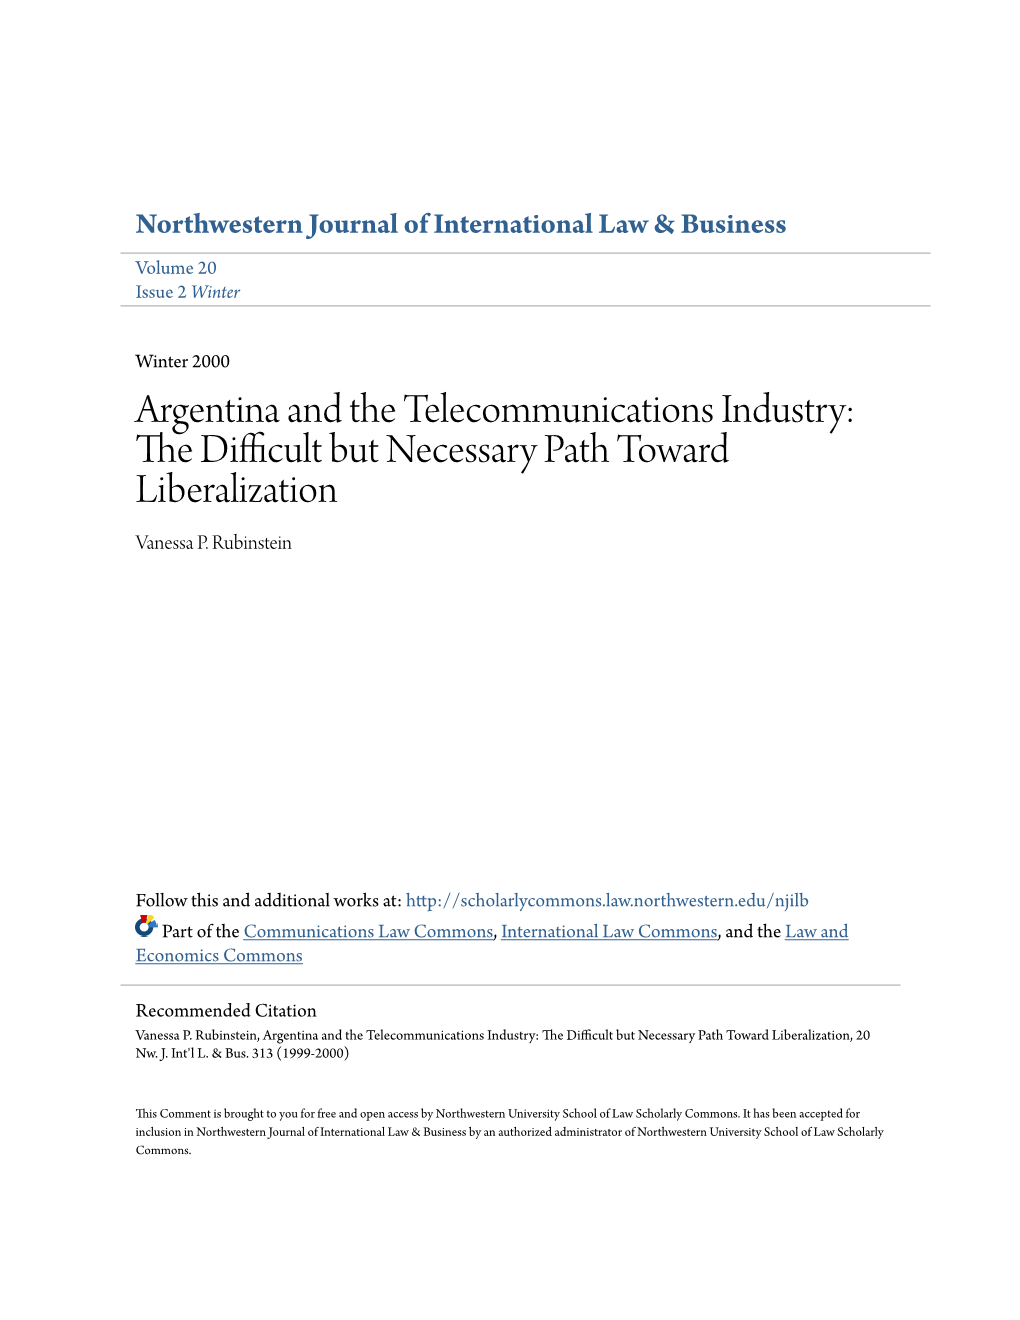 Argentina and the Telecommunications Industry: the Difficult but Necessary Path Toward Liberalization Vanessa P